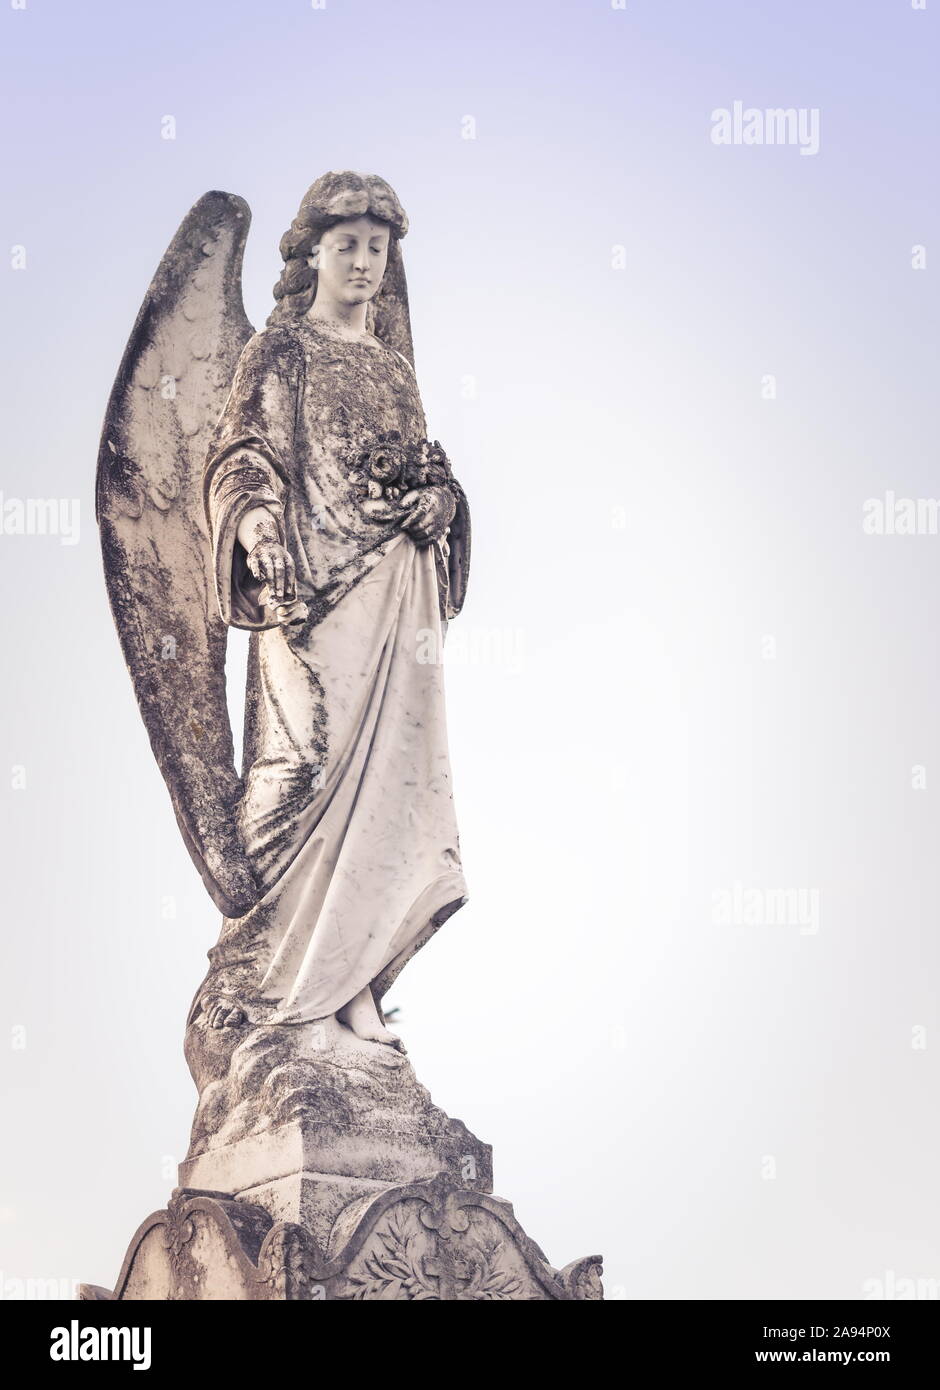 close up image of an angel figurine against a pale sky background. Stock Photo